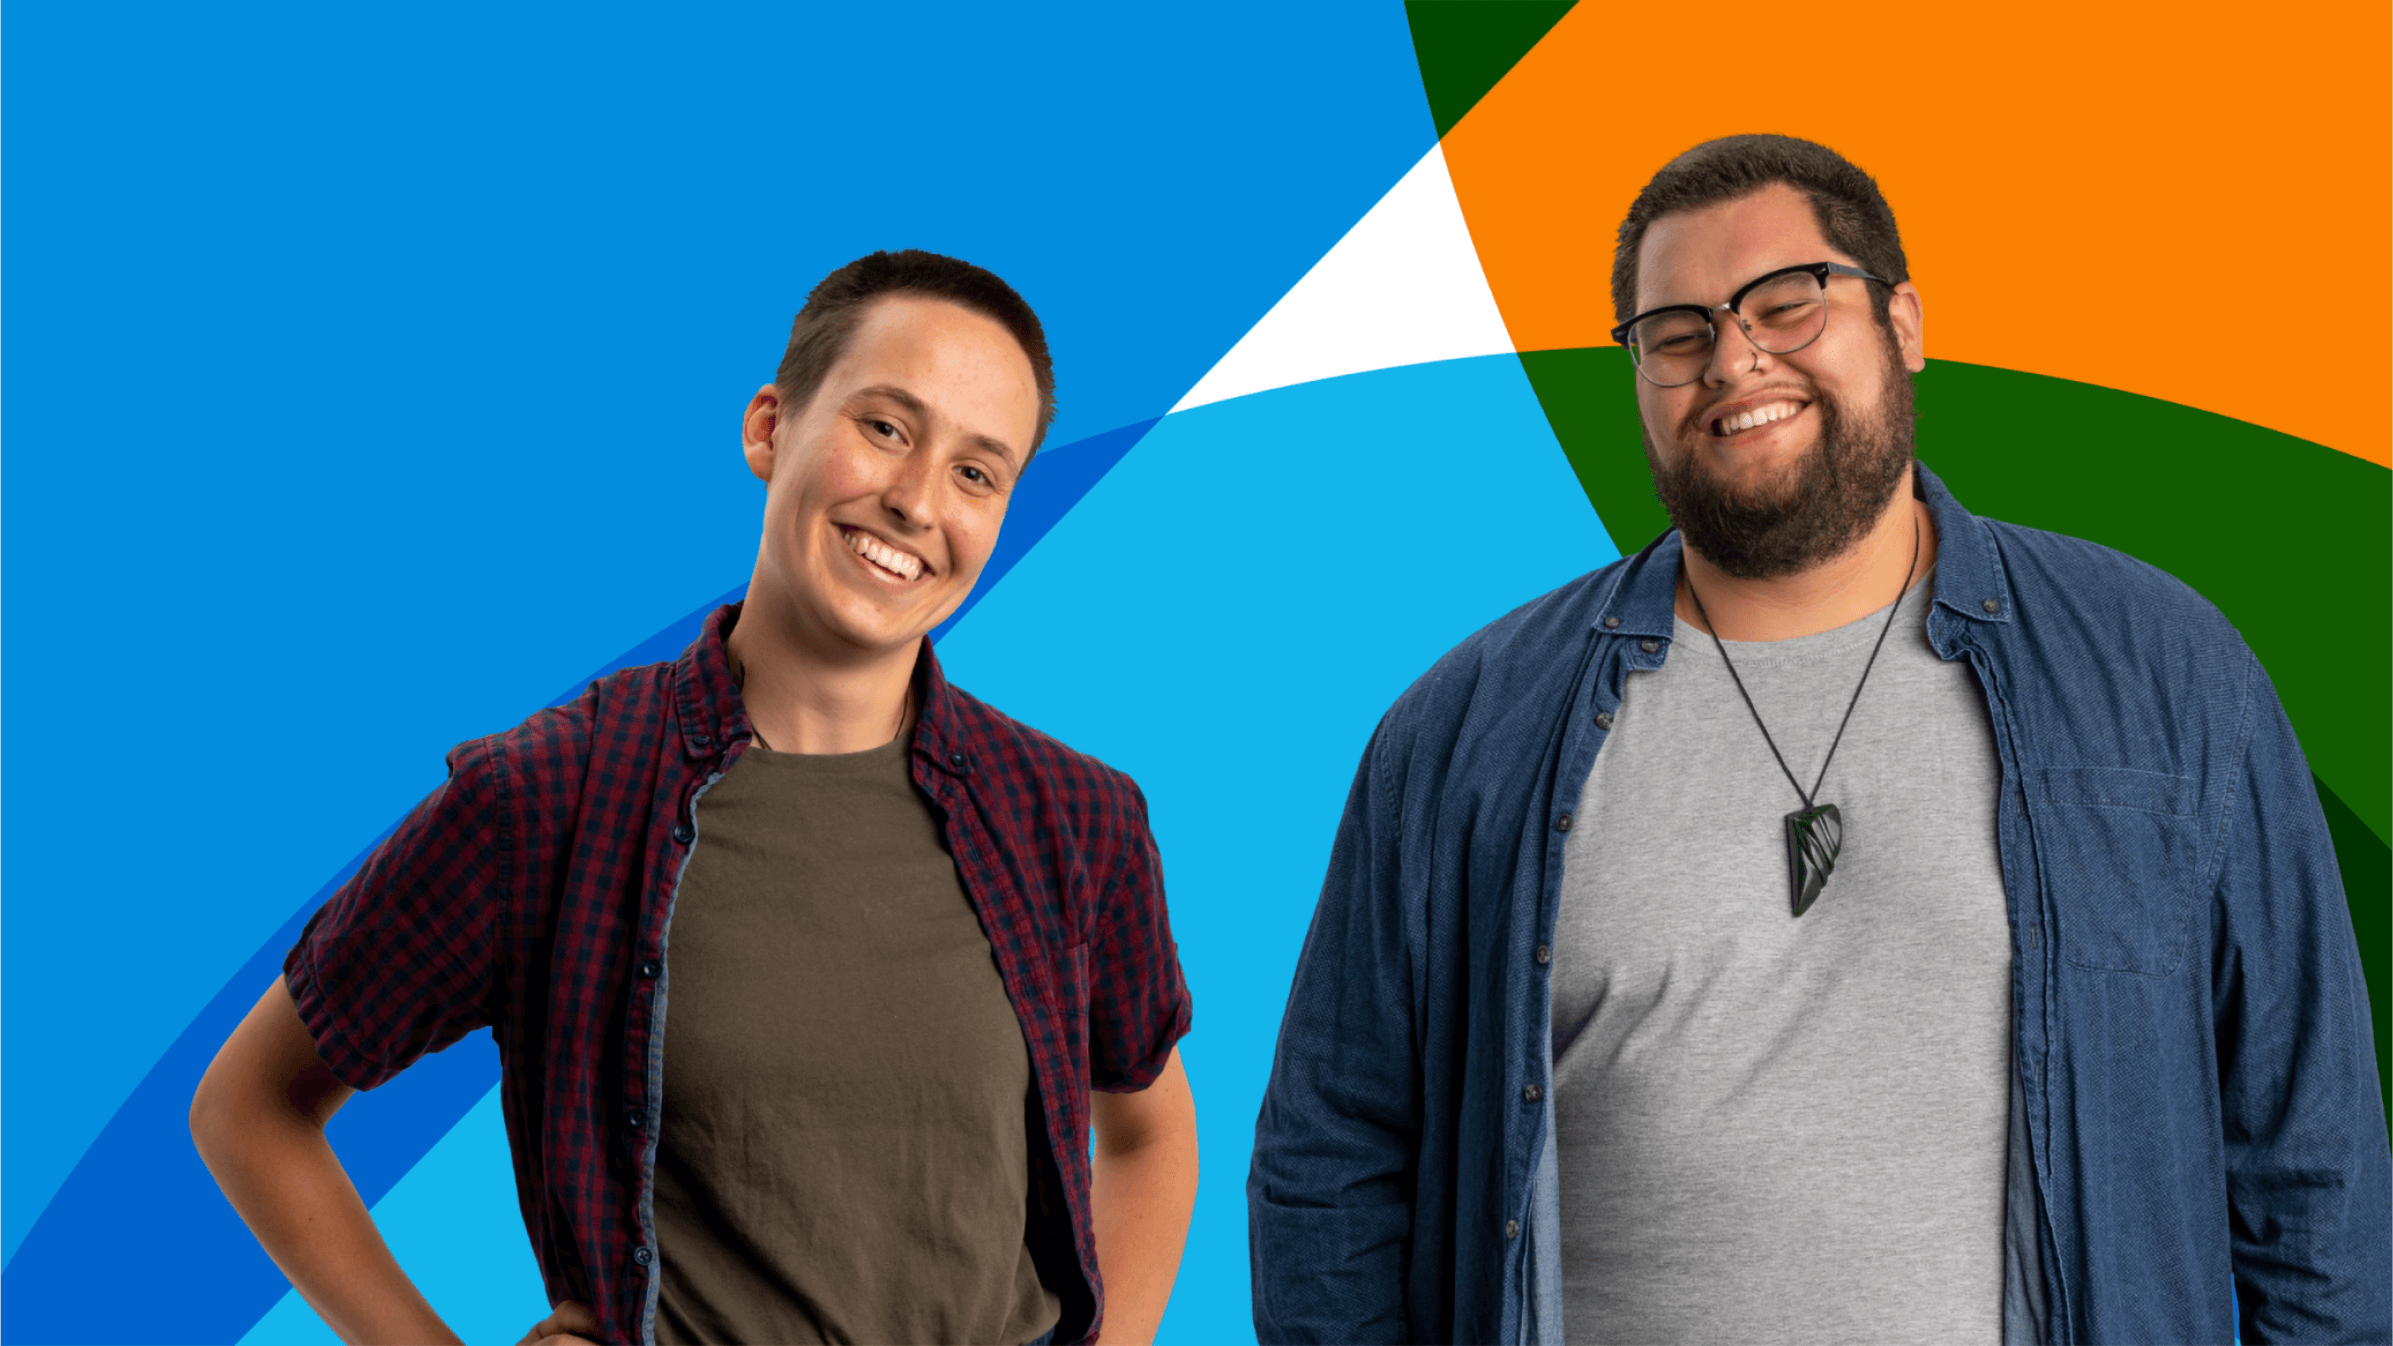 Two Xero grads smiling in front of a colorful background.